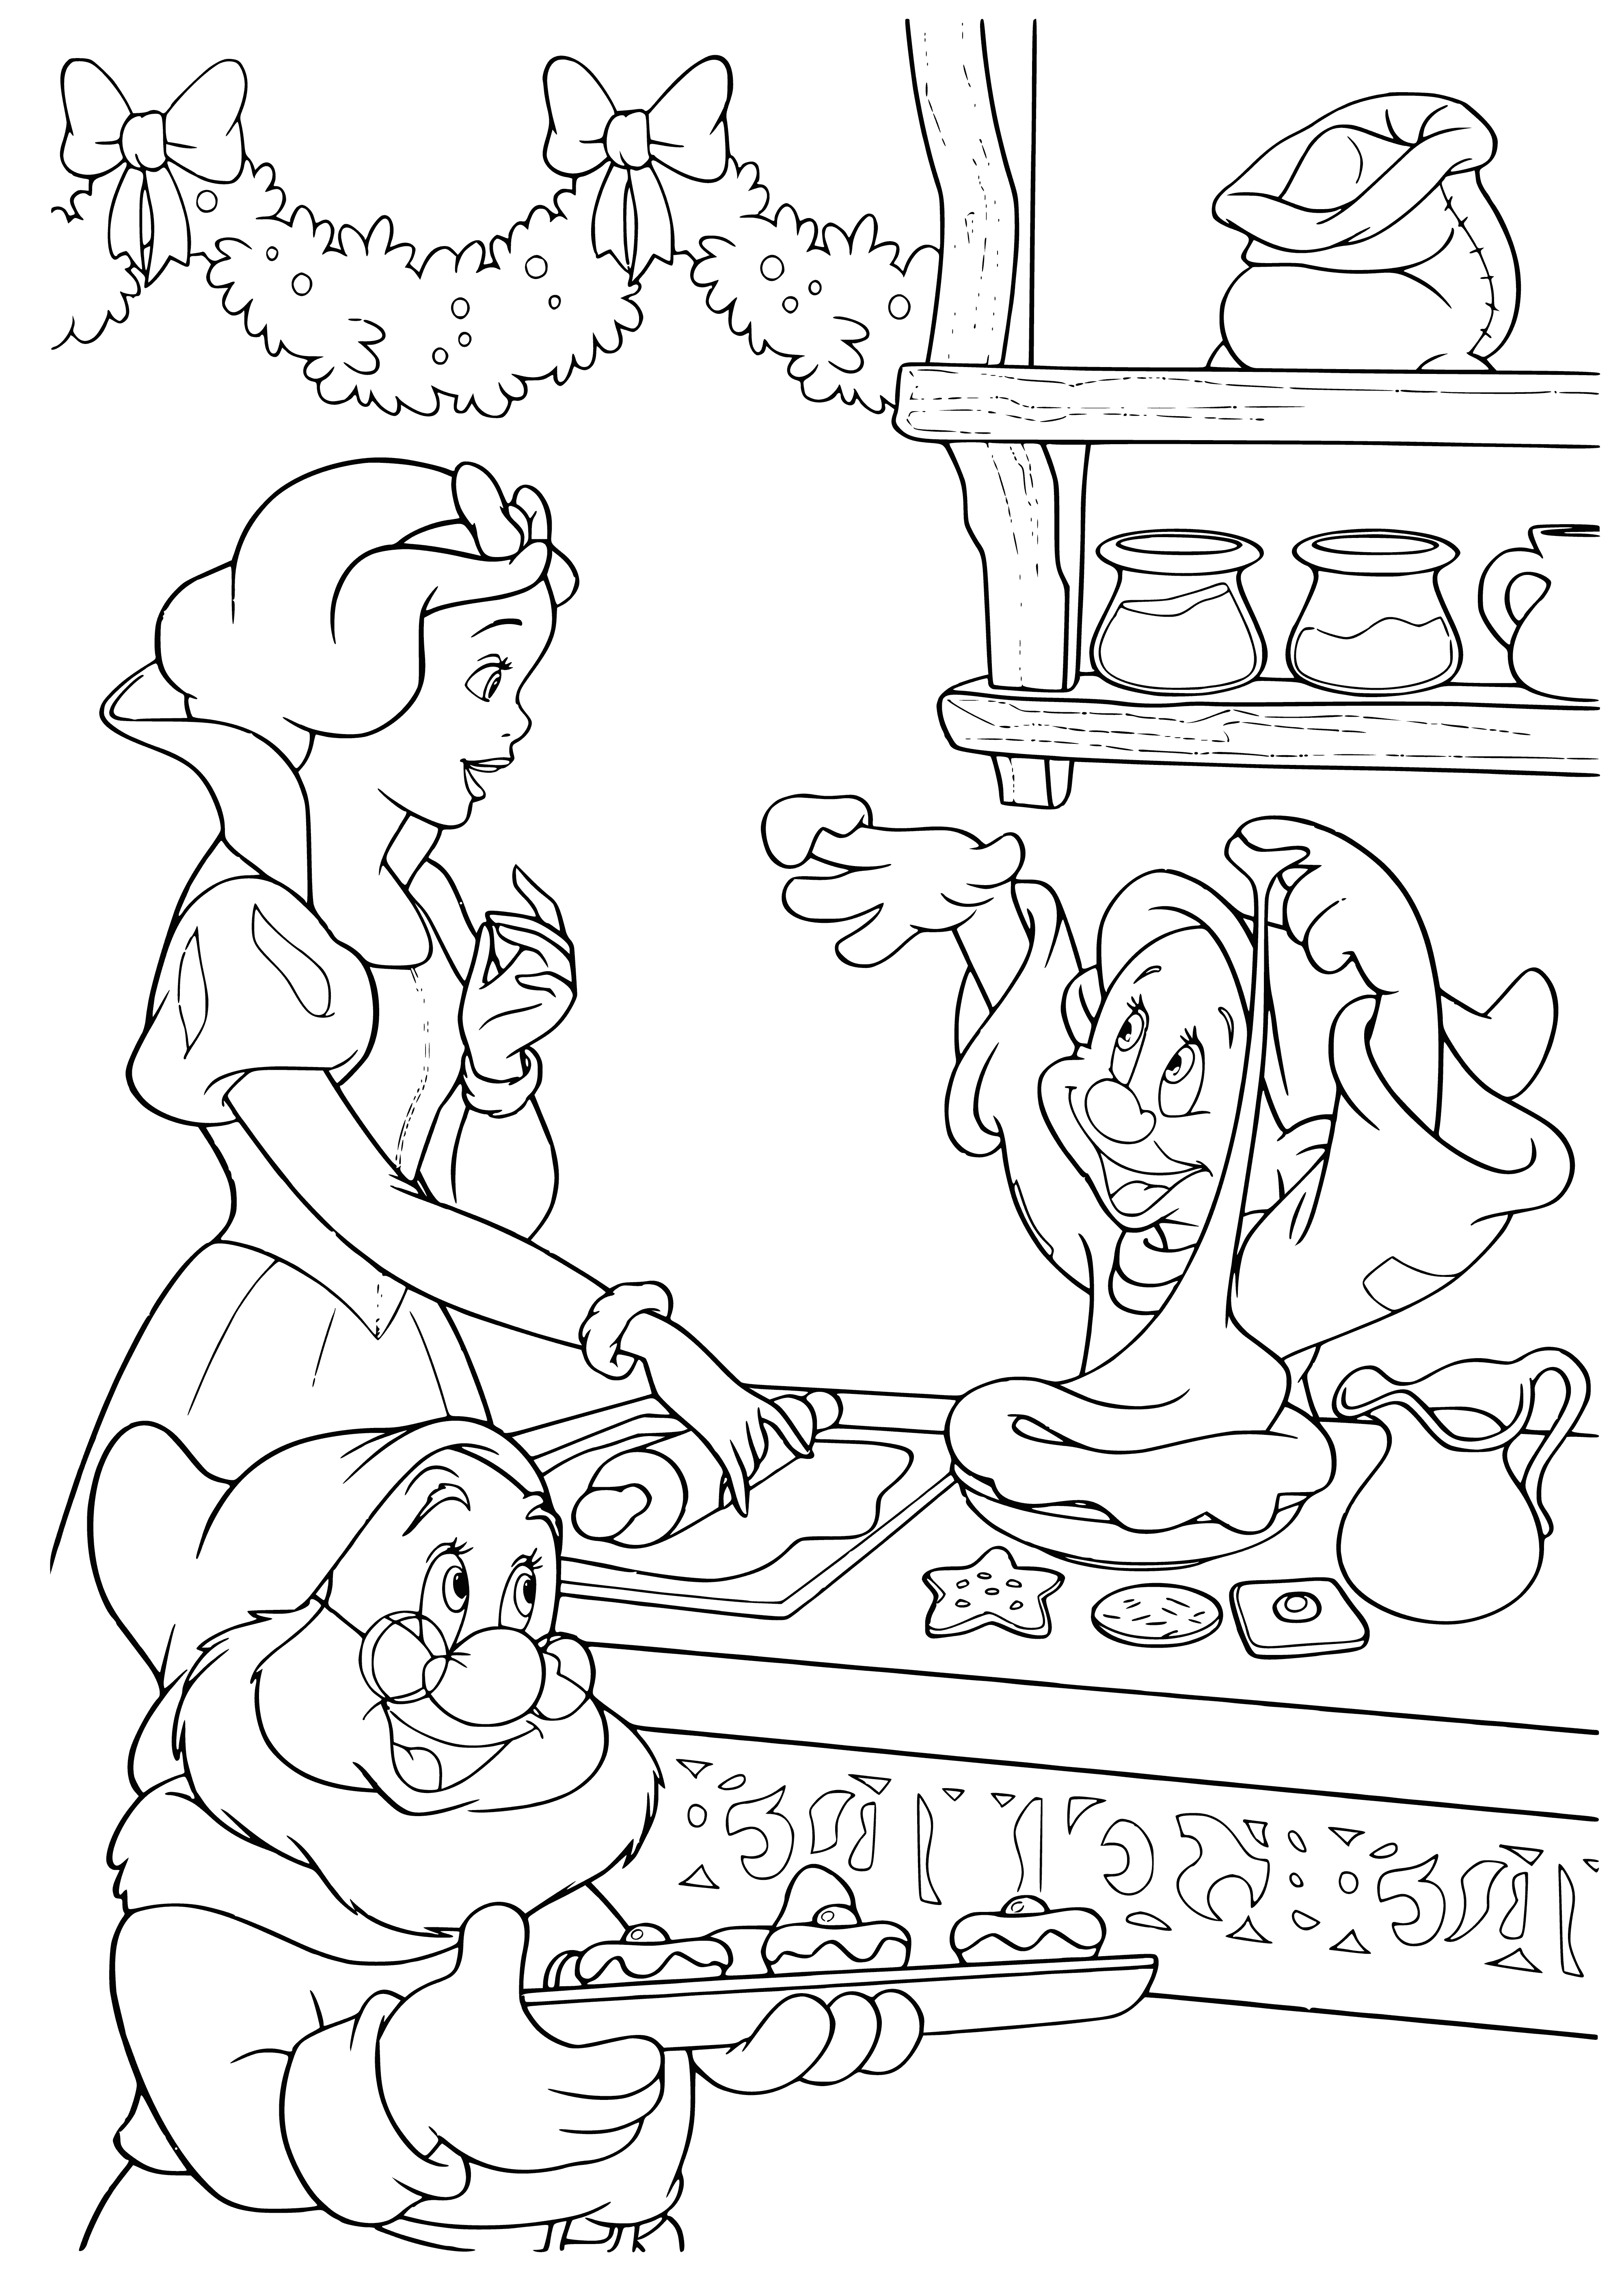 coloring page: Disney princesses celebrate New Year with champagne, cookies, and lots of smiles.